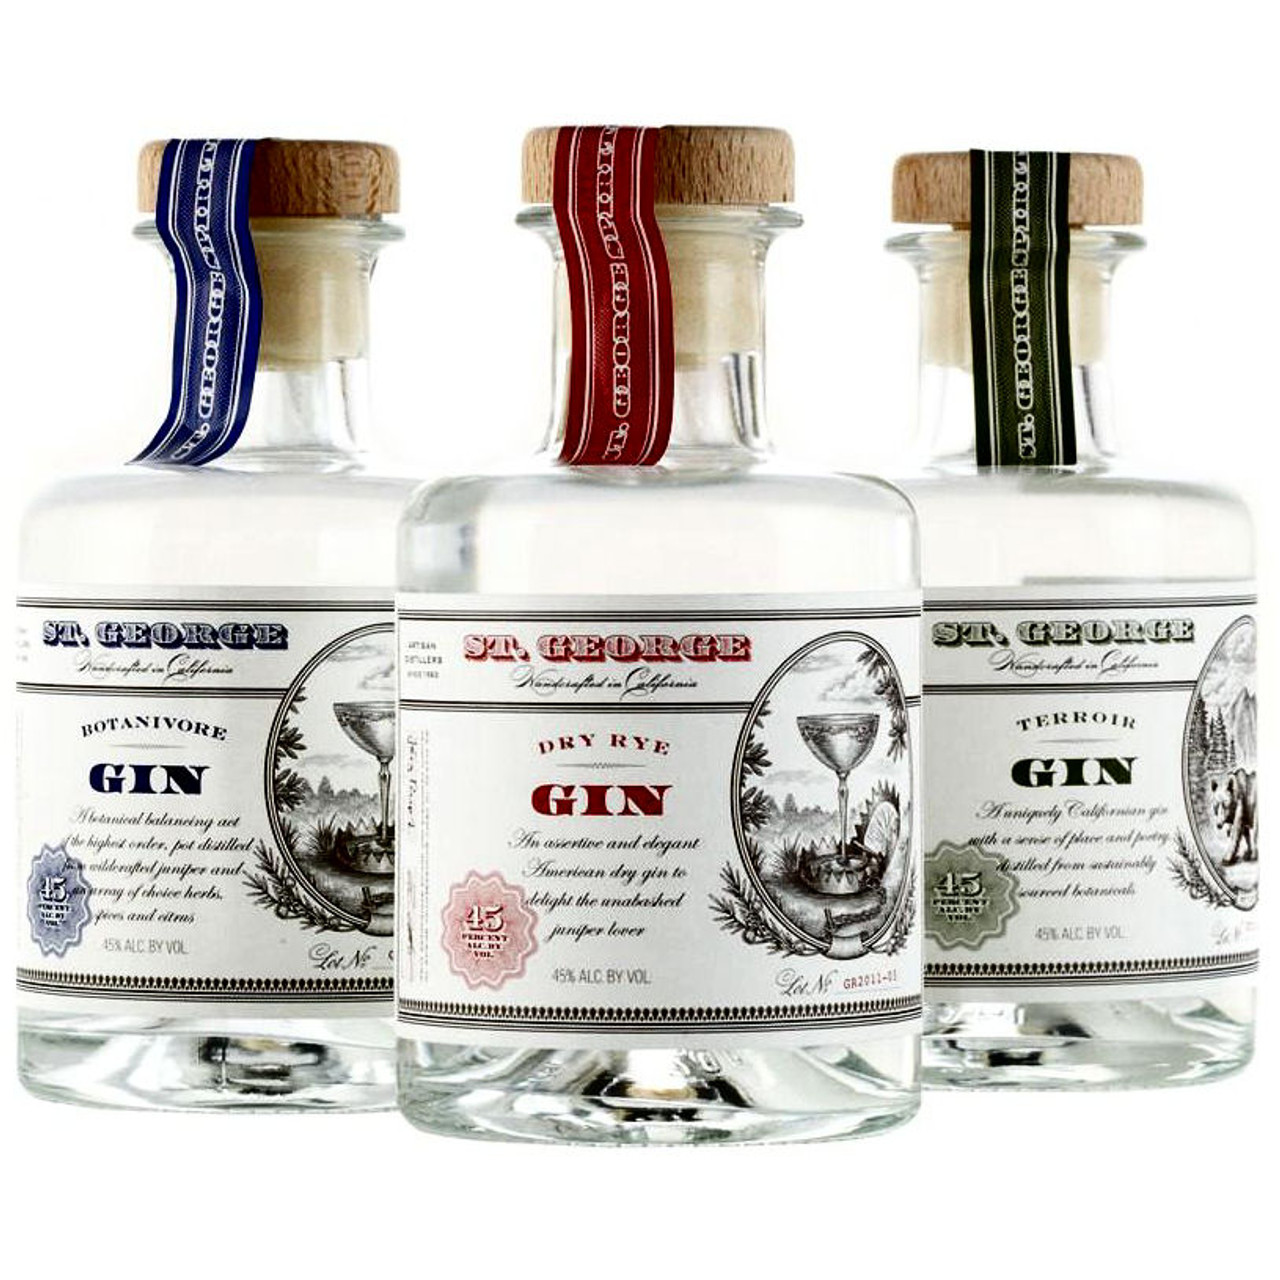 https://cdn11.bigcommerce.com/s-a04d0/images/stencil/1280x1280/products/13044/13838/st-george-gin-3-bottle-combo__62585.1661917580.jpg?c=2